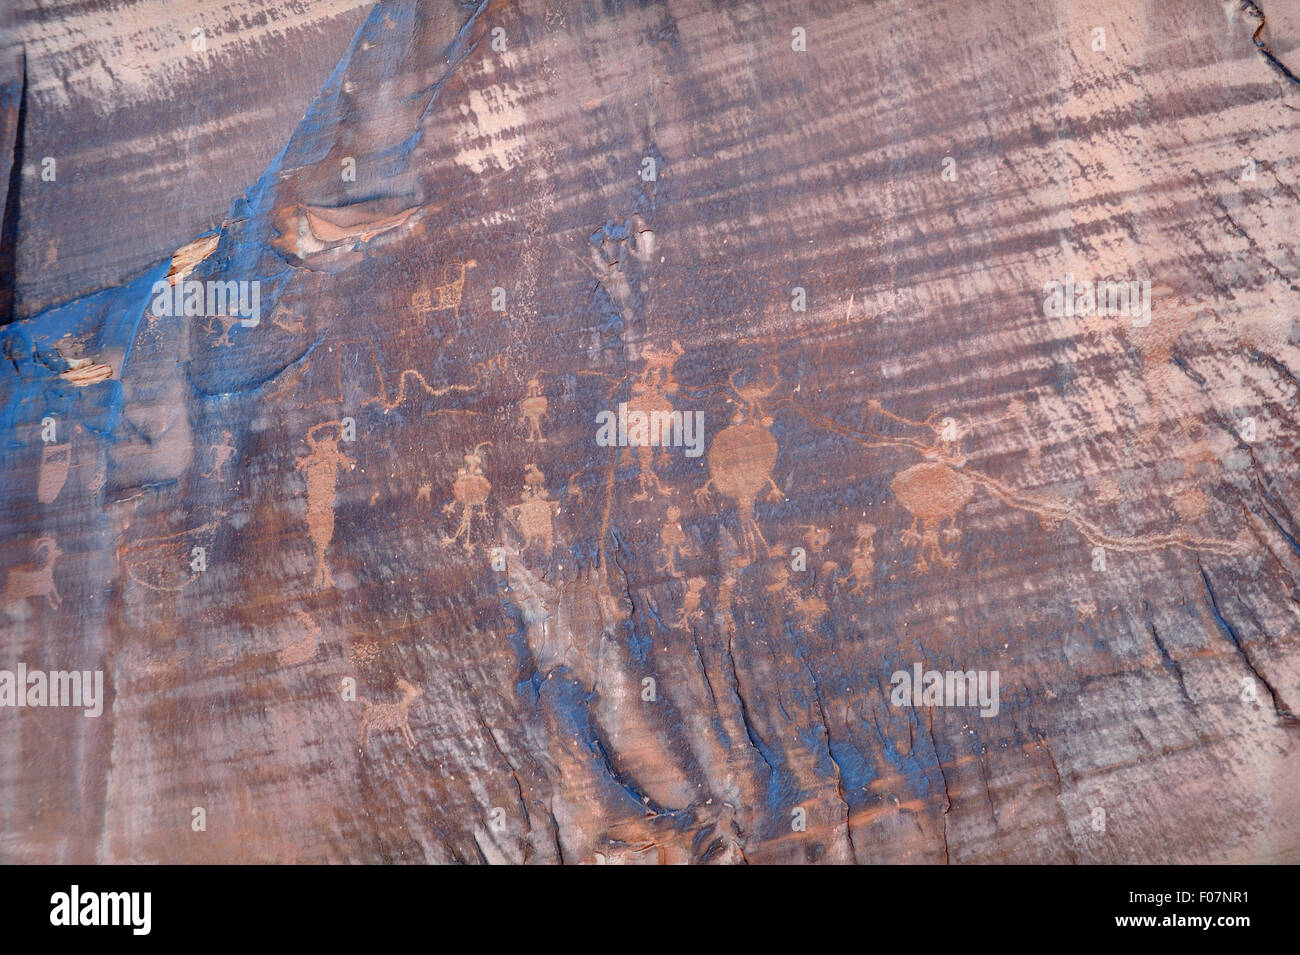 Ancient Indian pettroglyphs on the rock walls along the Colorad River in Moab, Utah; United States. Stock Photo